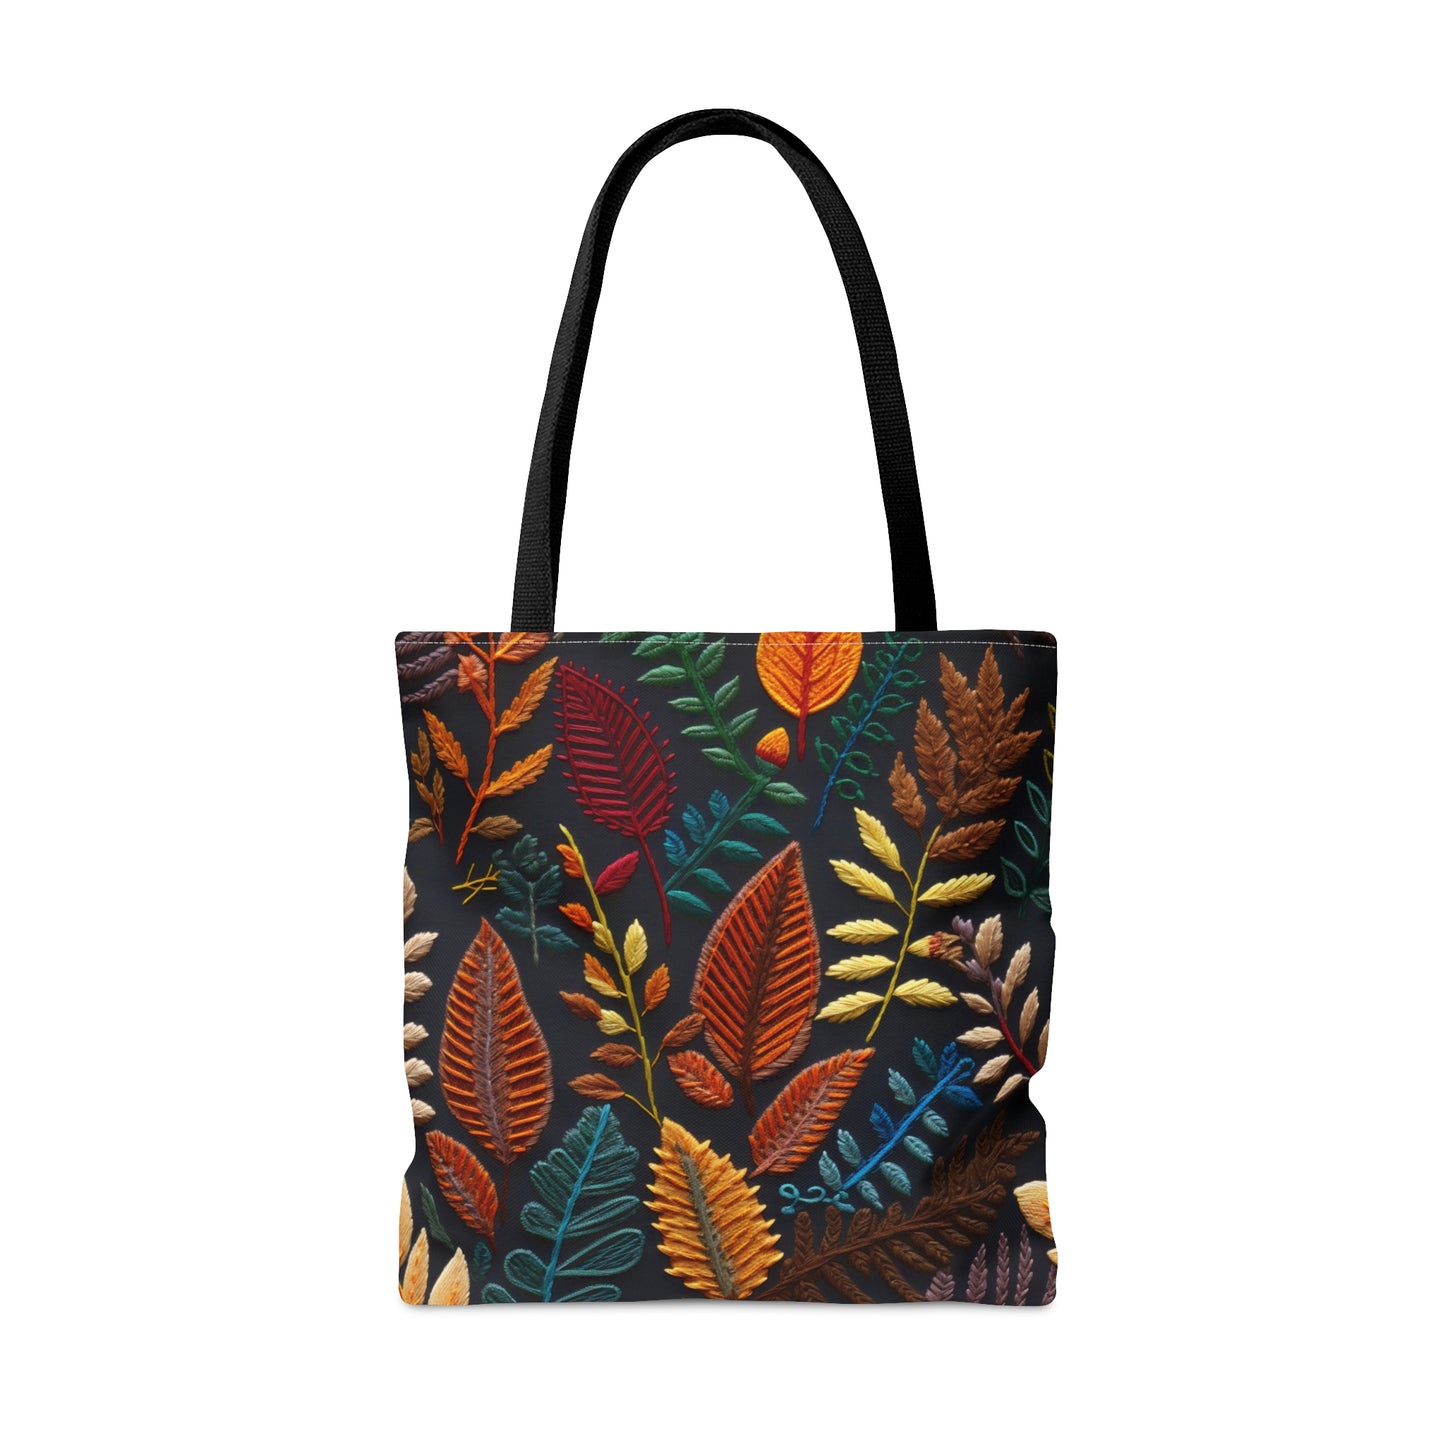 Embroidered Fall Leaves Tote Bag (AOP)